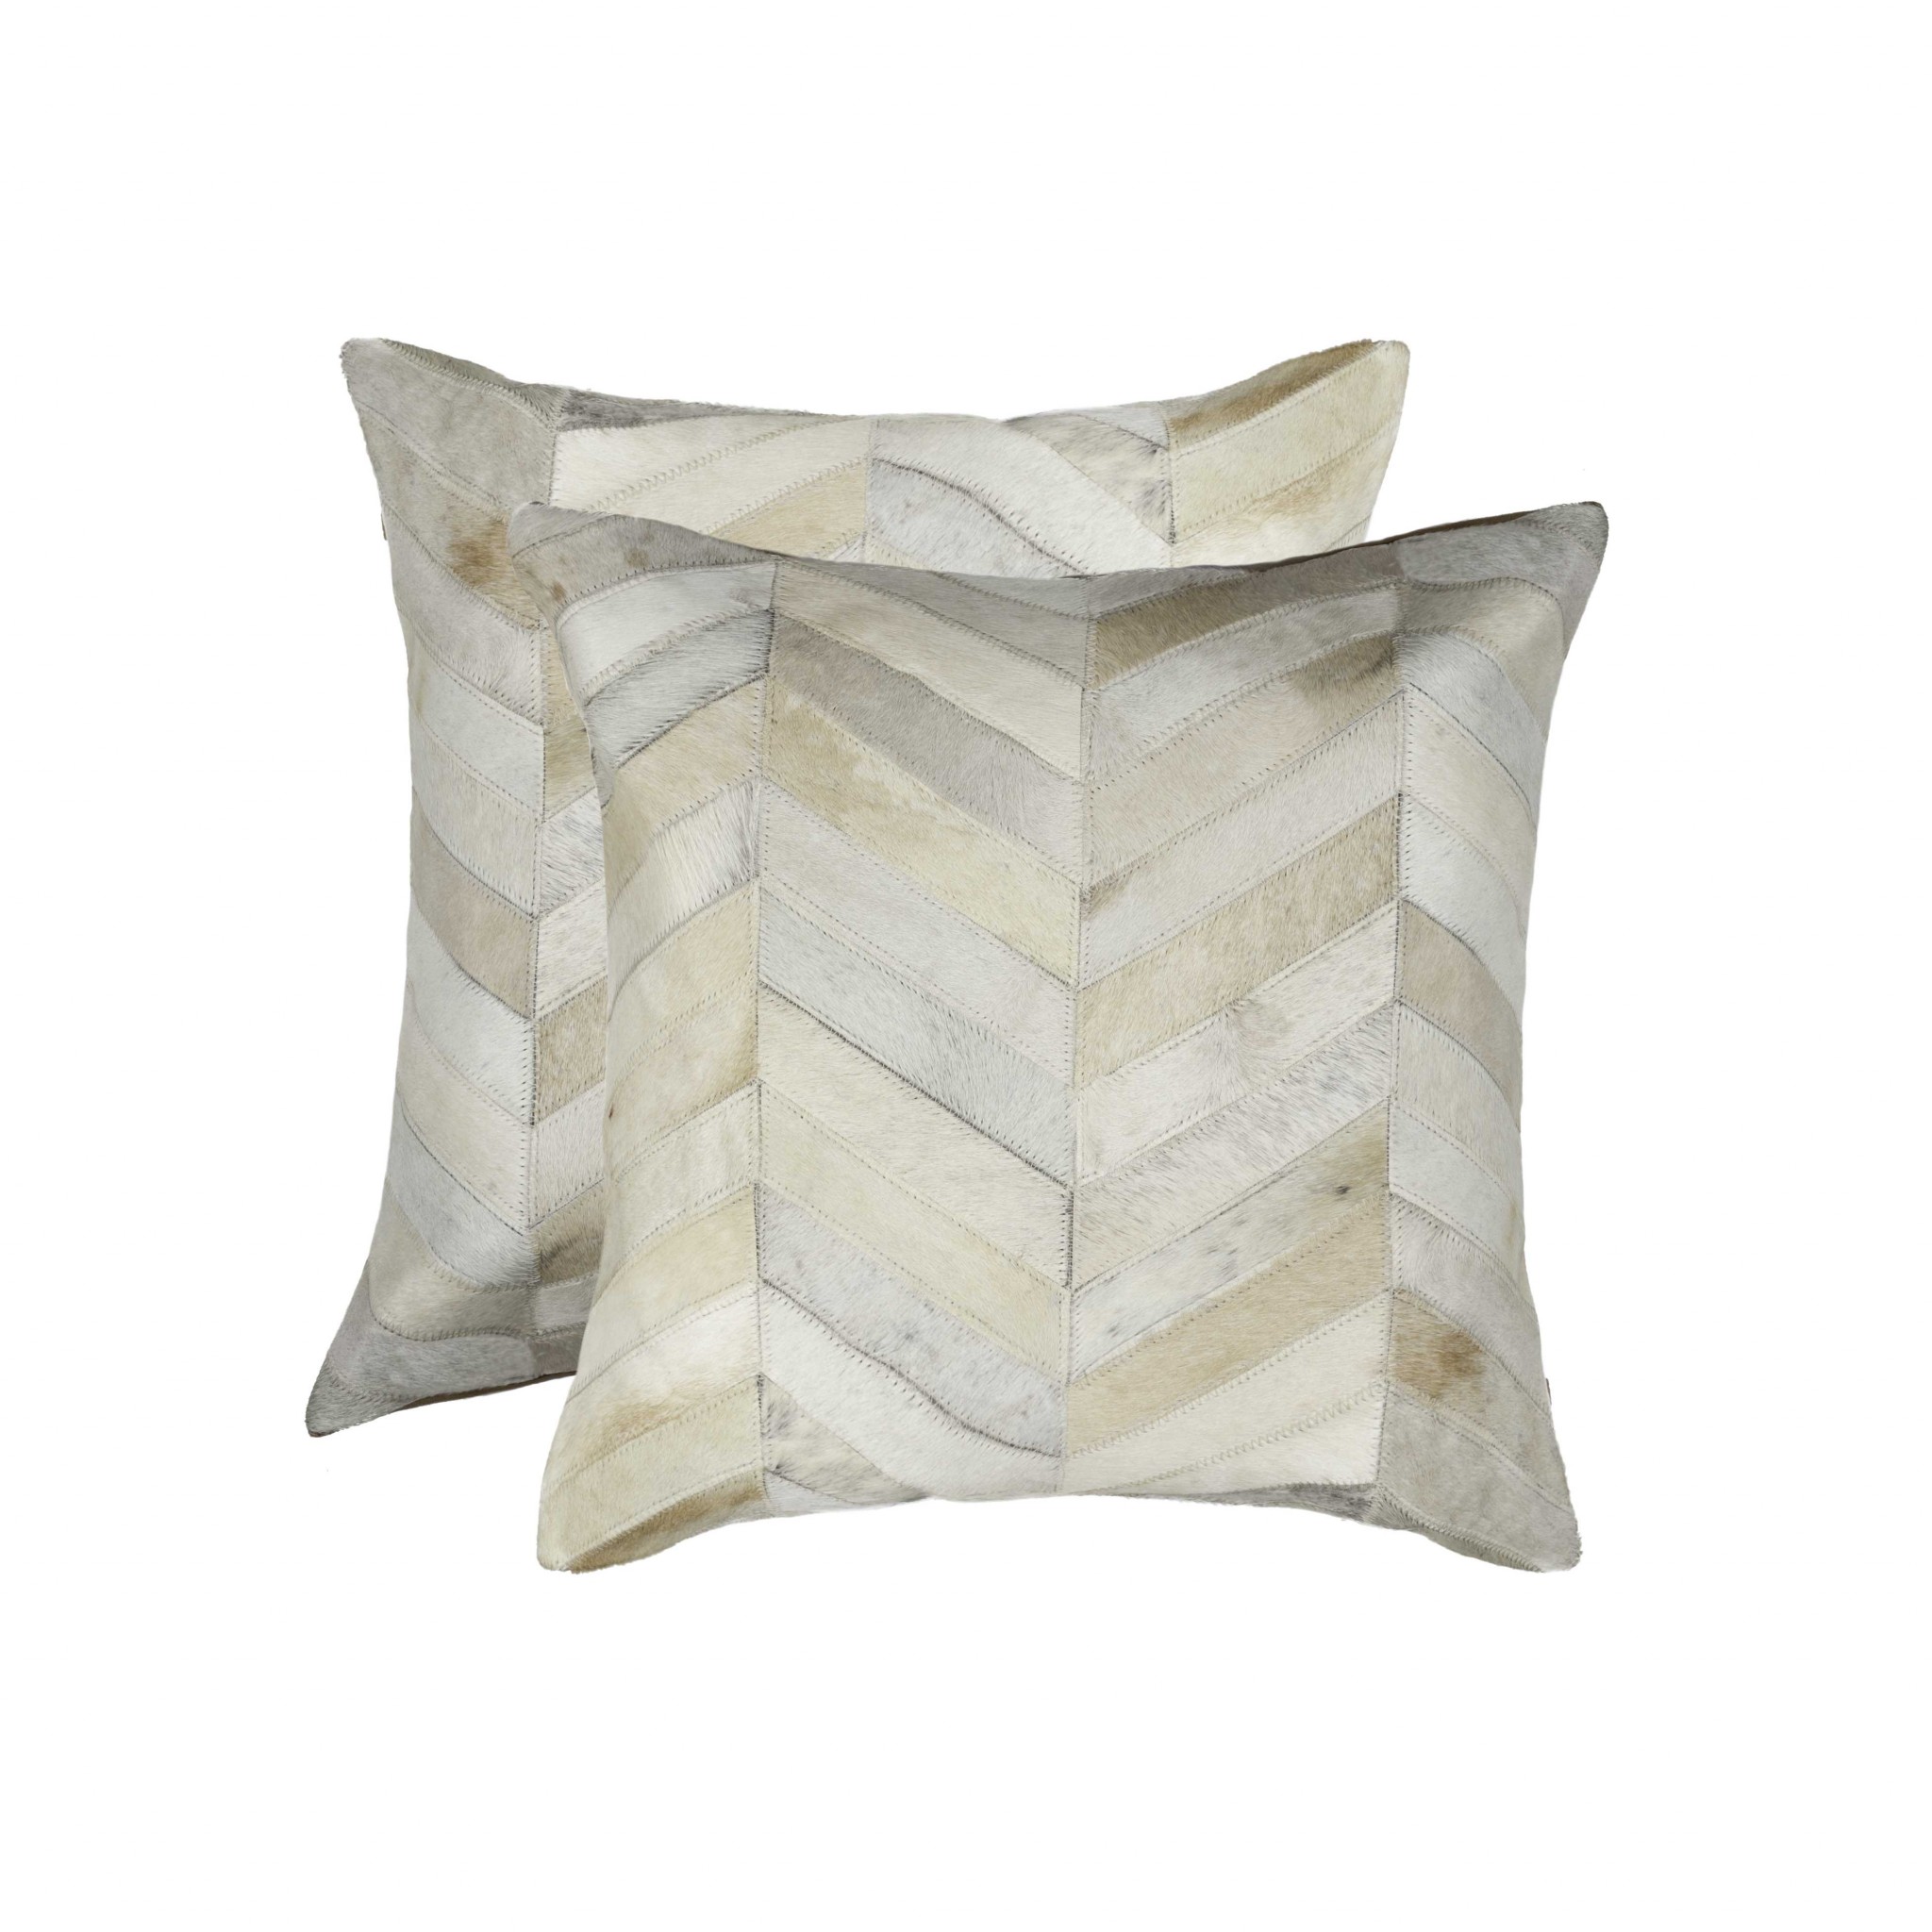 18" x 18" x 5" Natural, Cowhide - Pillow 2-Pack